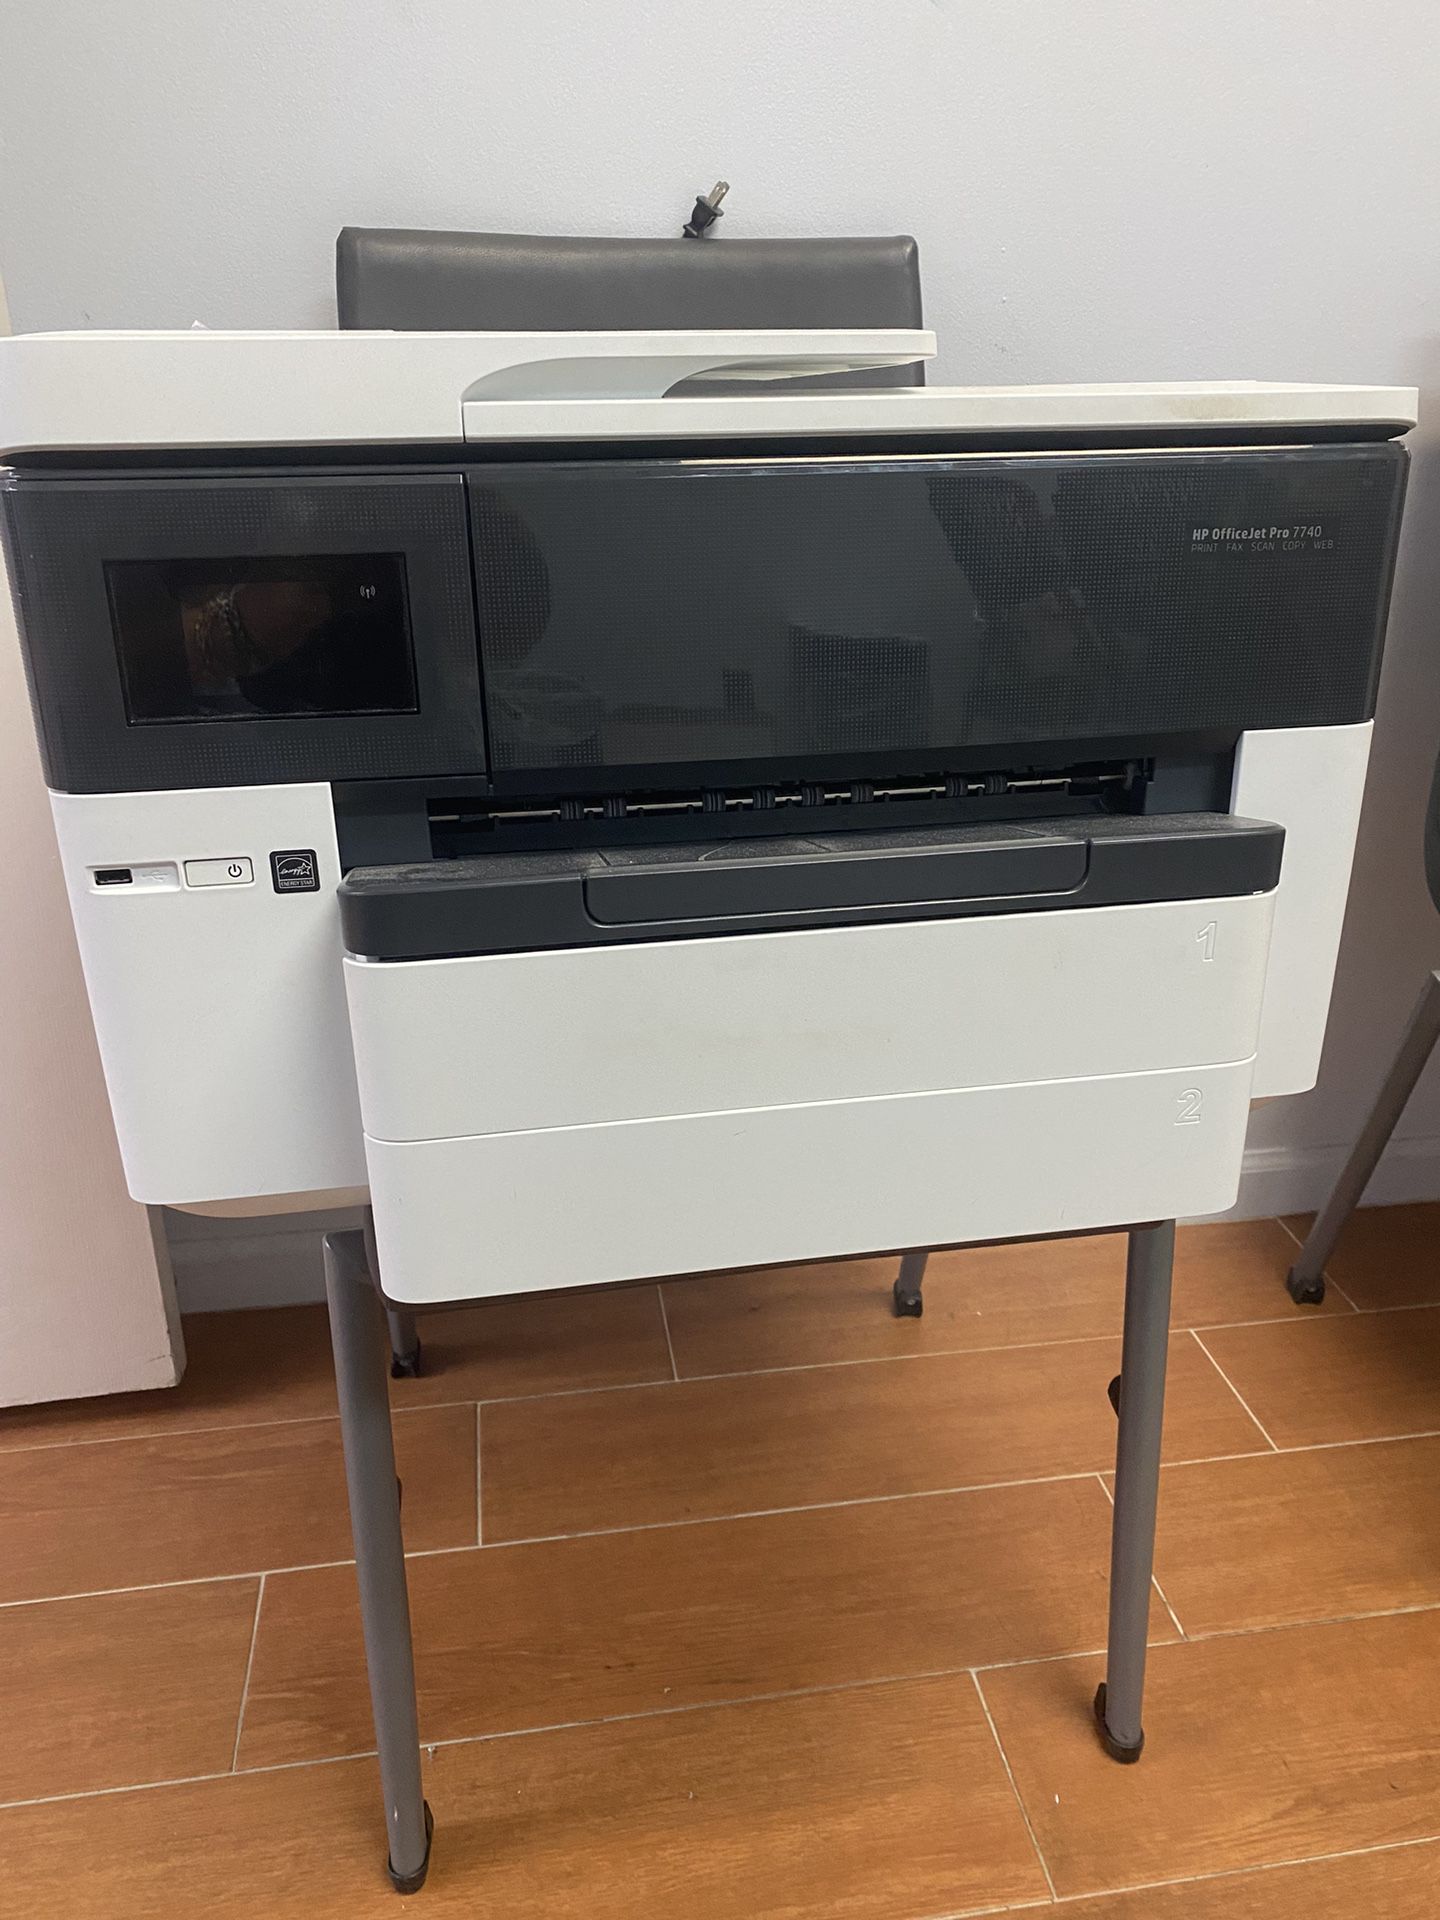 HP Officejet Pro 7740 Print-Fax-Scan-Copy USED